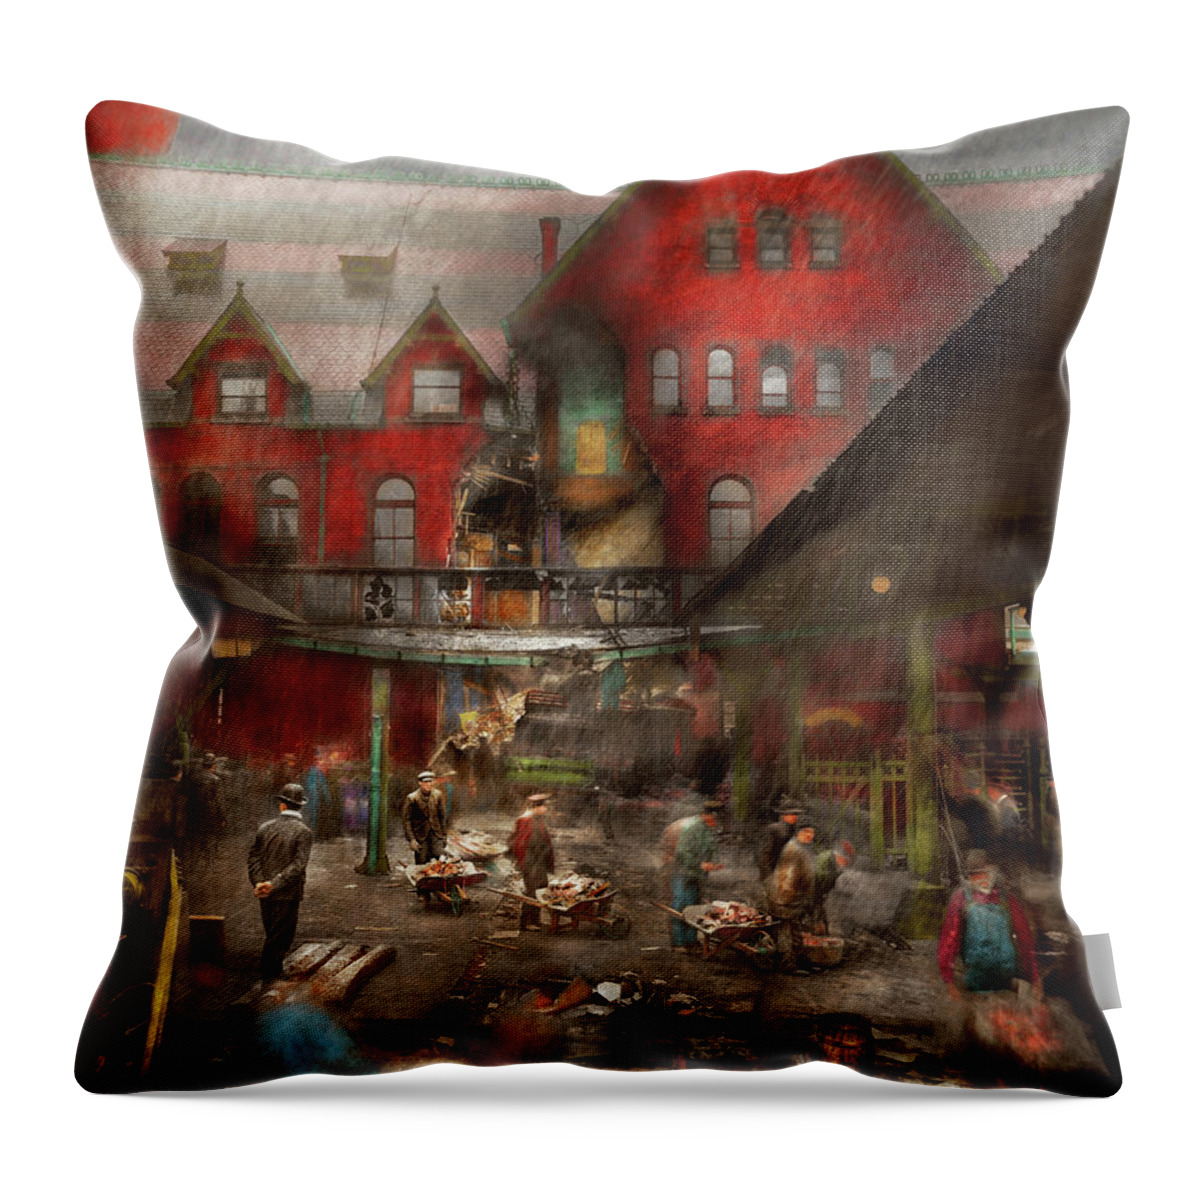 Train Throw Pillow featuring the photograph Train Station - Accident - Smasher disaster 1906 by Mike Savad